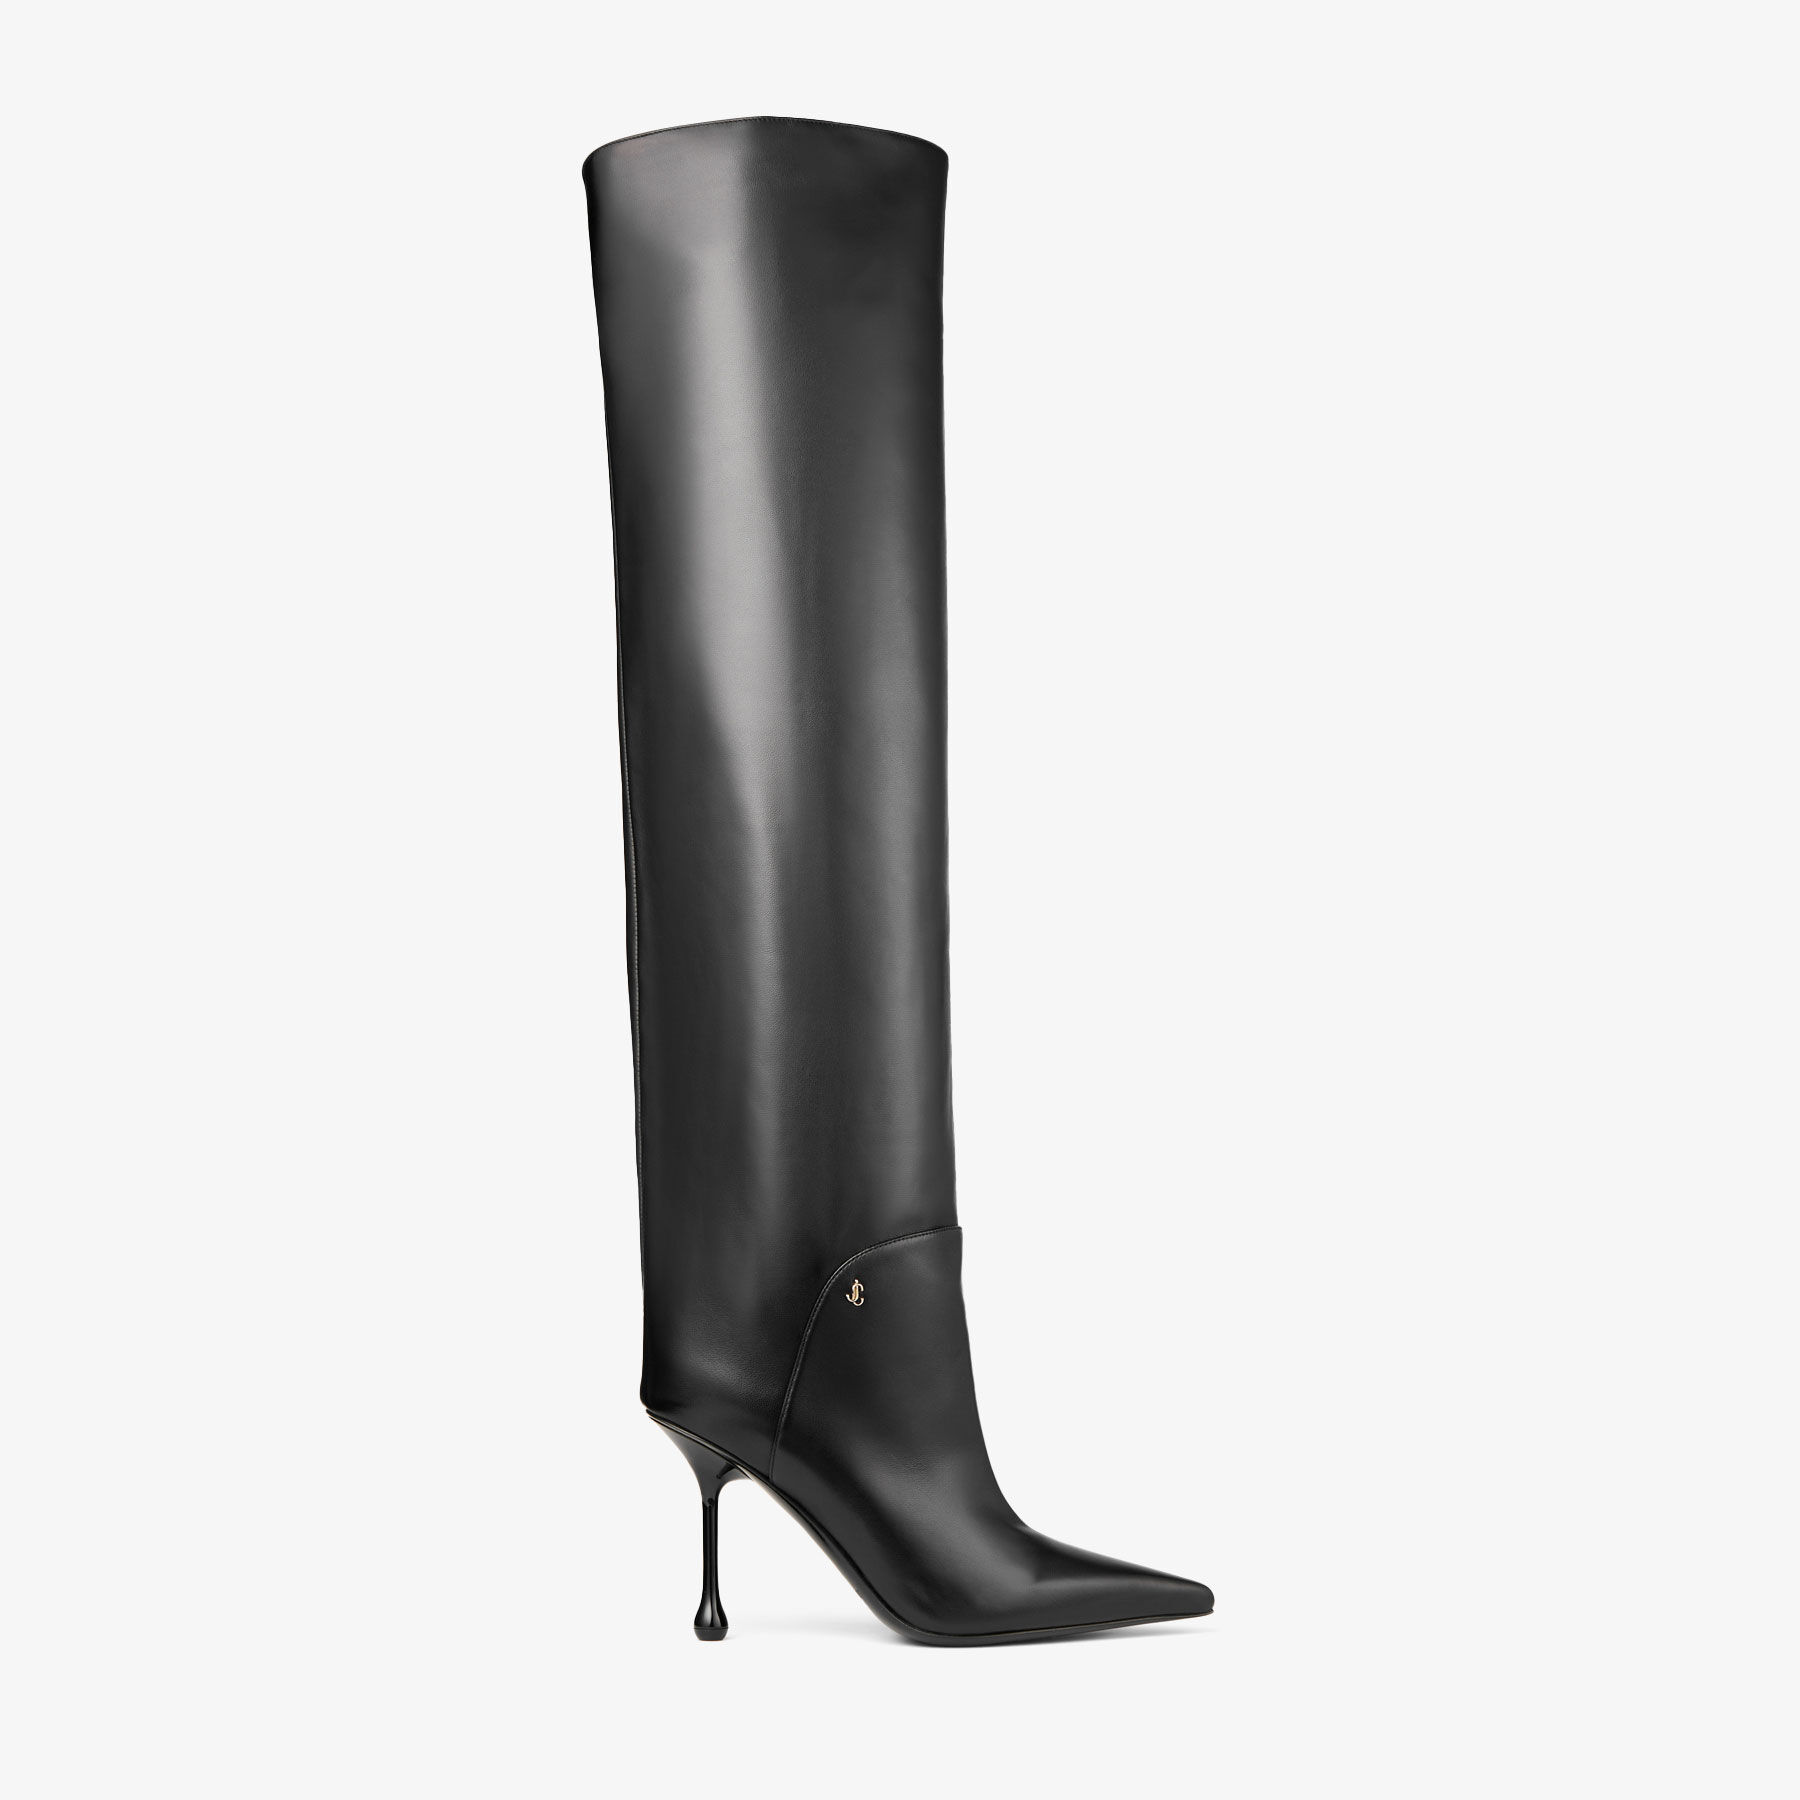 Stylish Black Suede Over-the-Knee Boots with Cut-Out Detailing